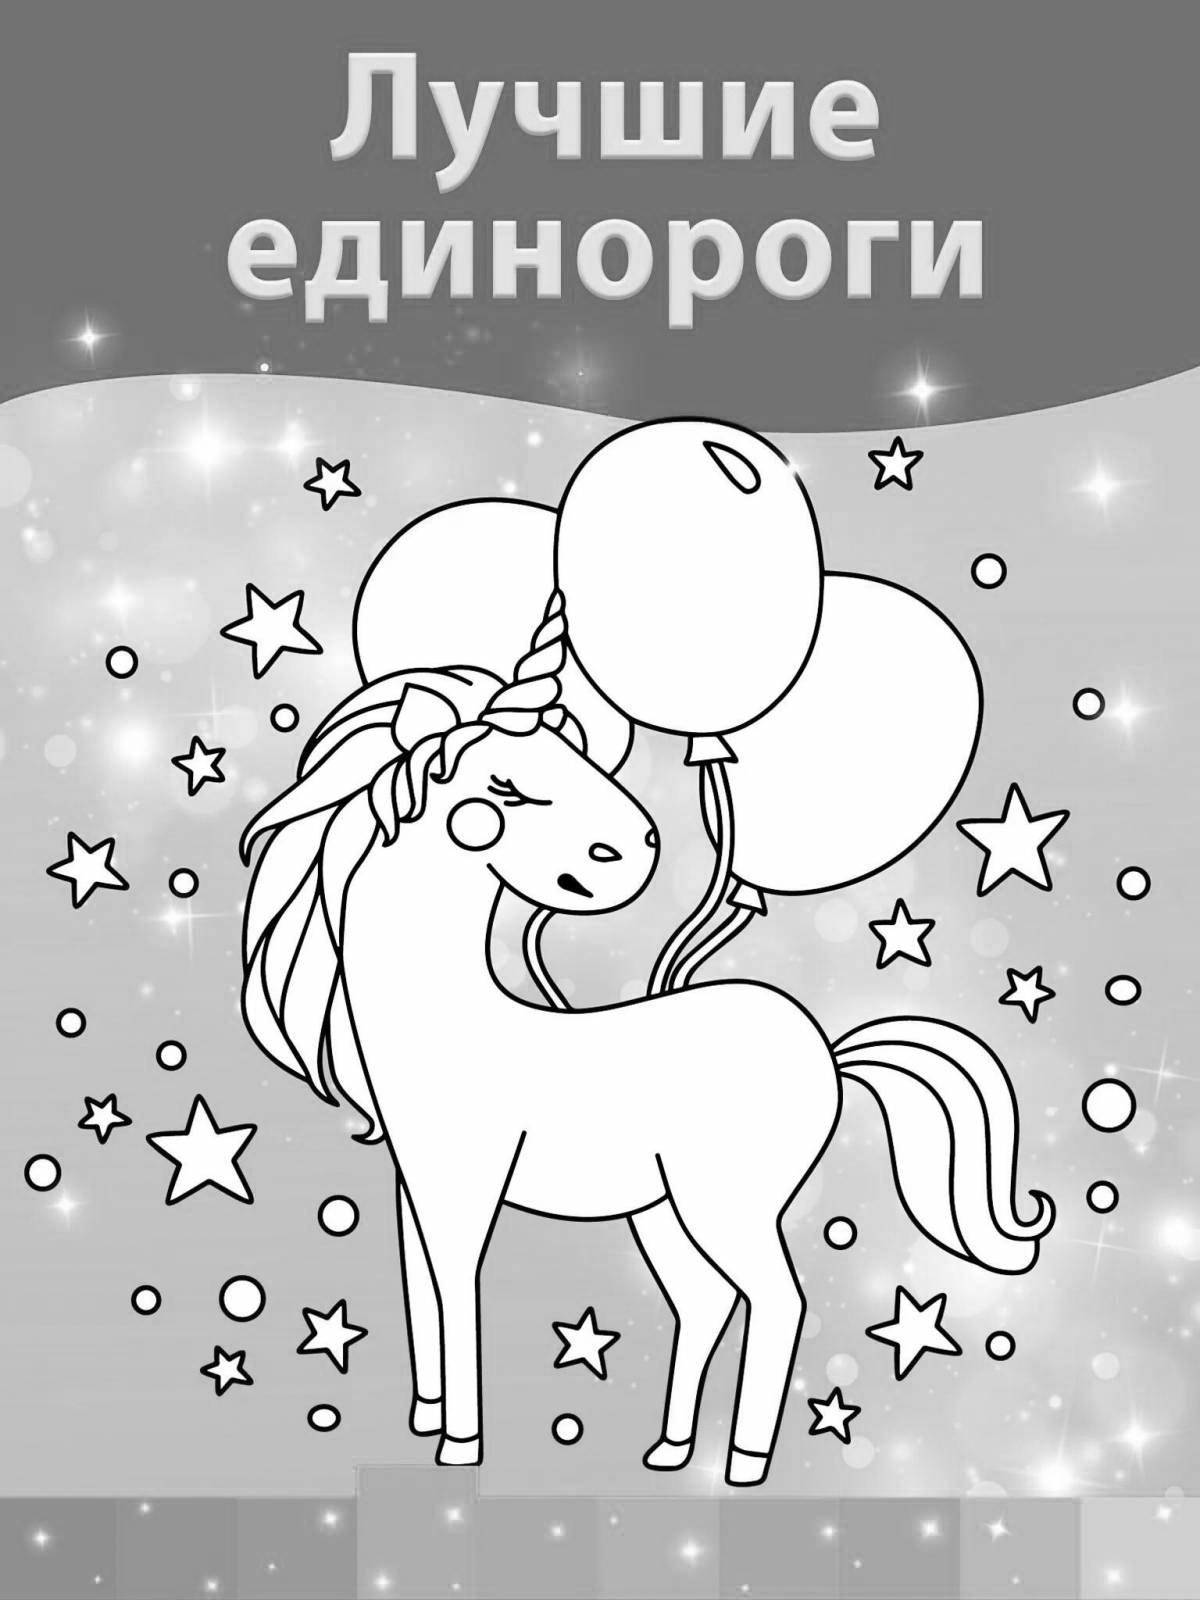 Fun unicorn coloring pages